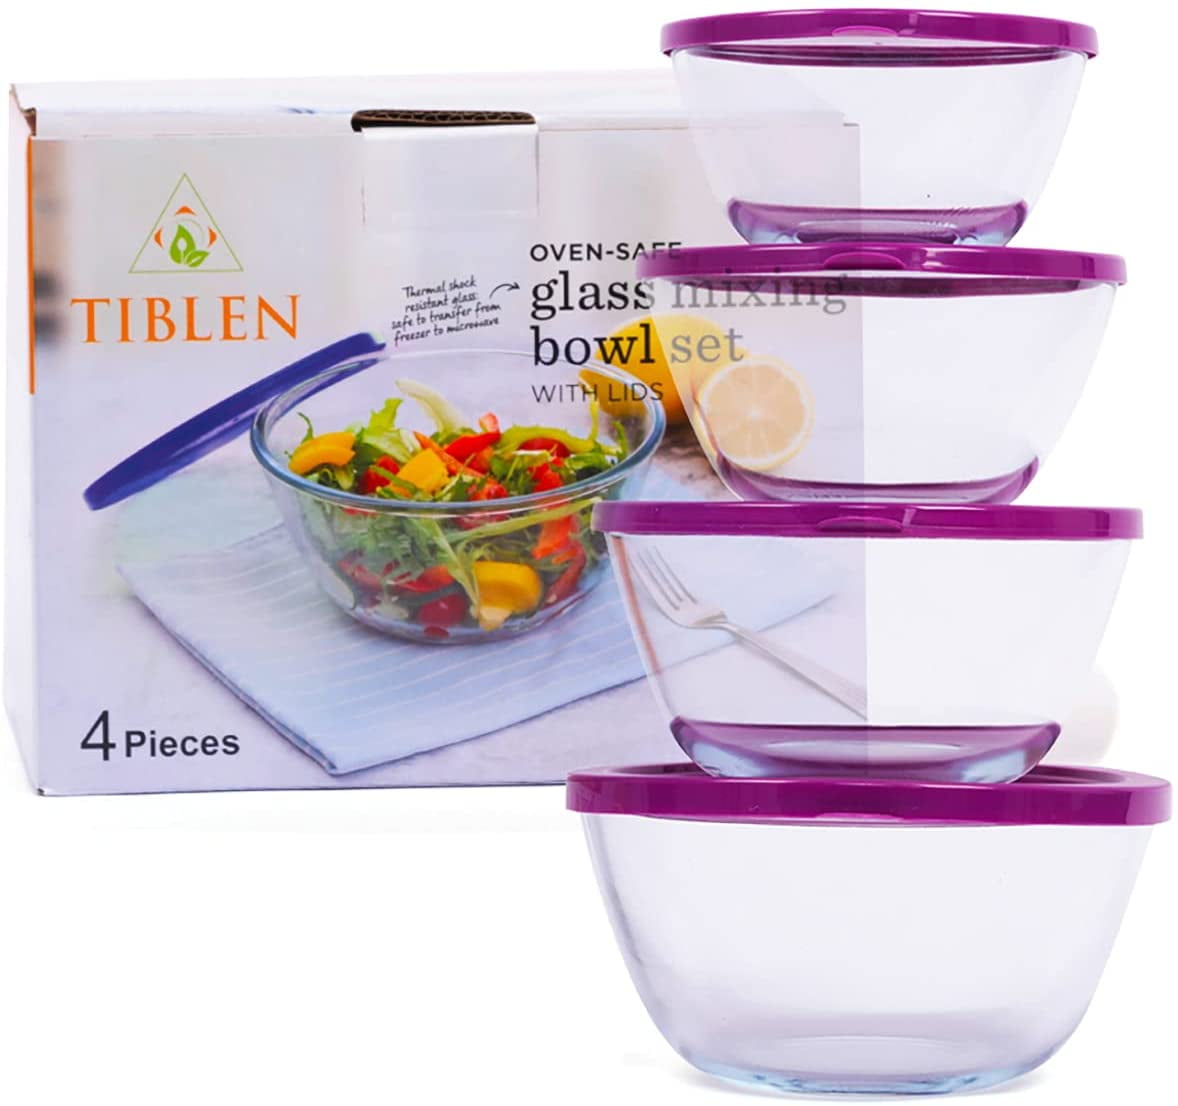 Volarium Small Glass Storage Containers with Lids, Stackable Bowls, Set of 4 with Multi-Colored BPA Free Lids for Cooking Prep, Sauce